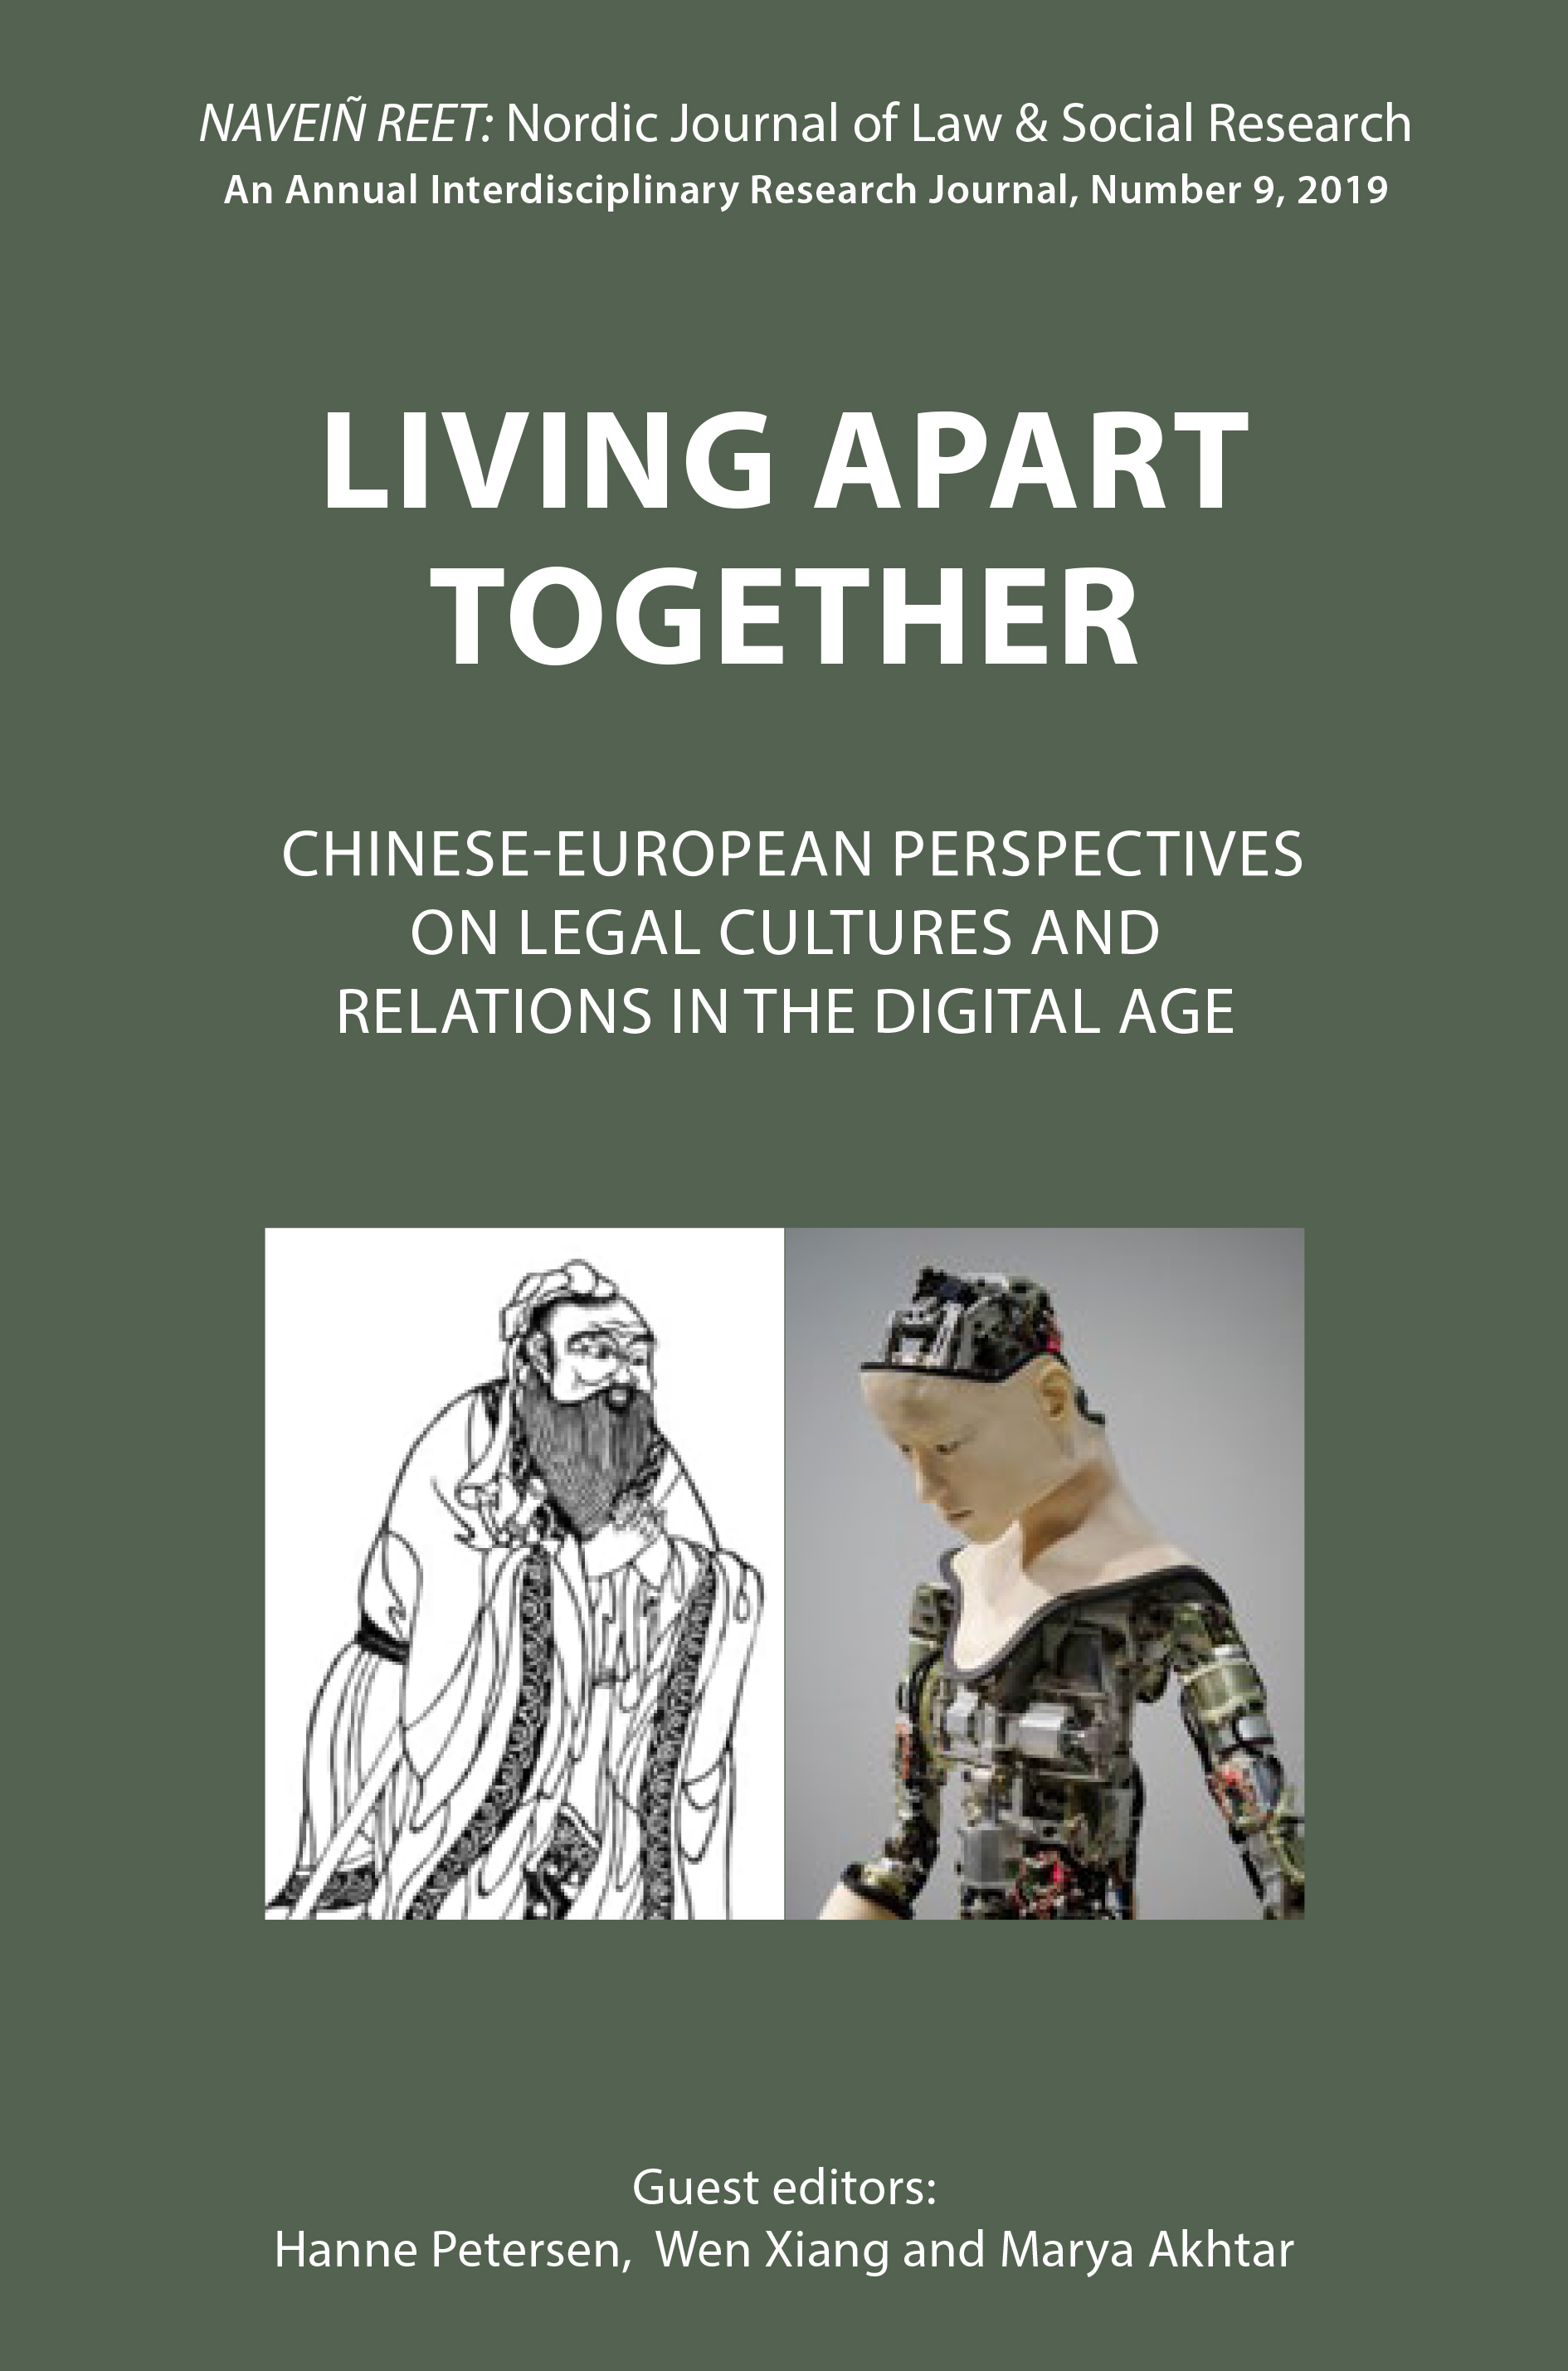 					View No. 9 (2019): NAVEIÑ REET: Nordic Journal of Law & Social Research - Living Apart Together
				